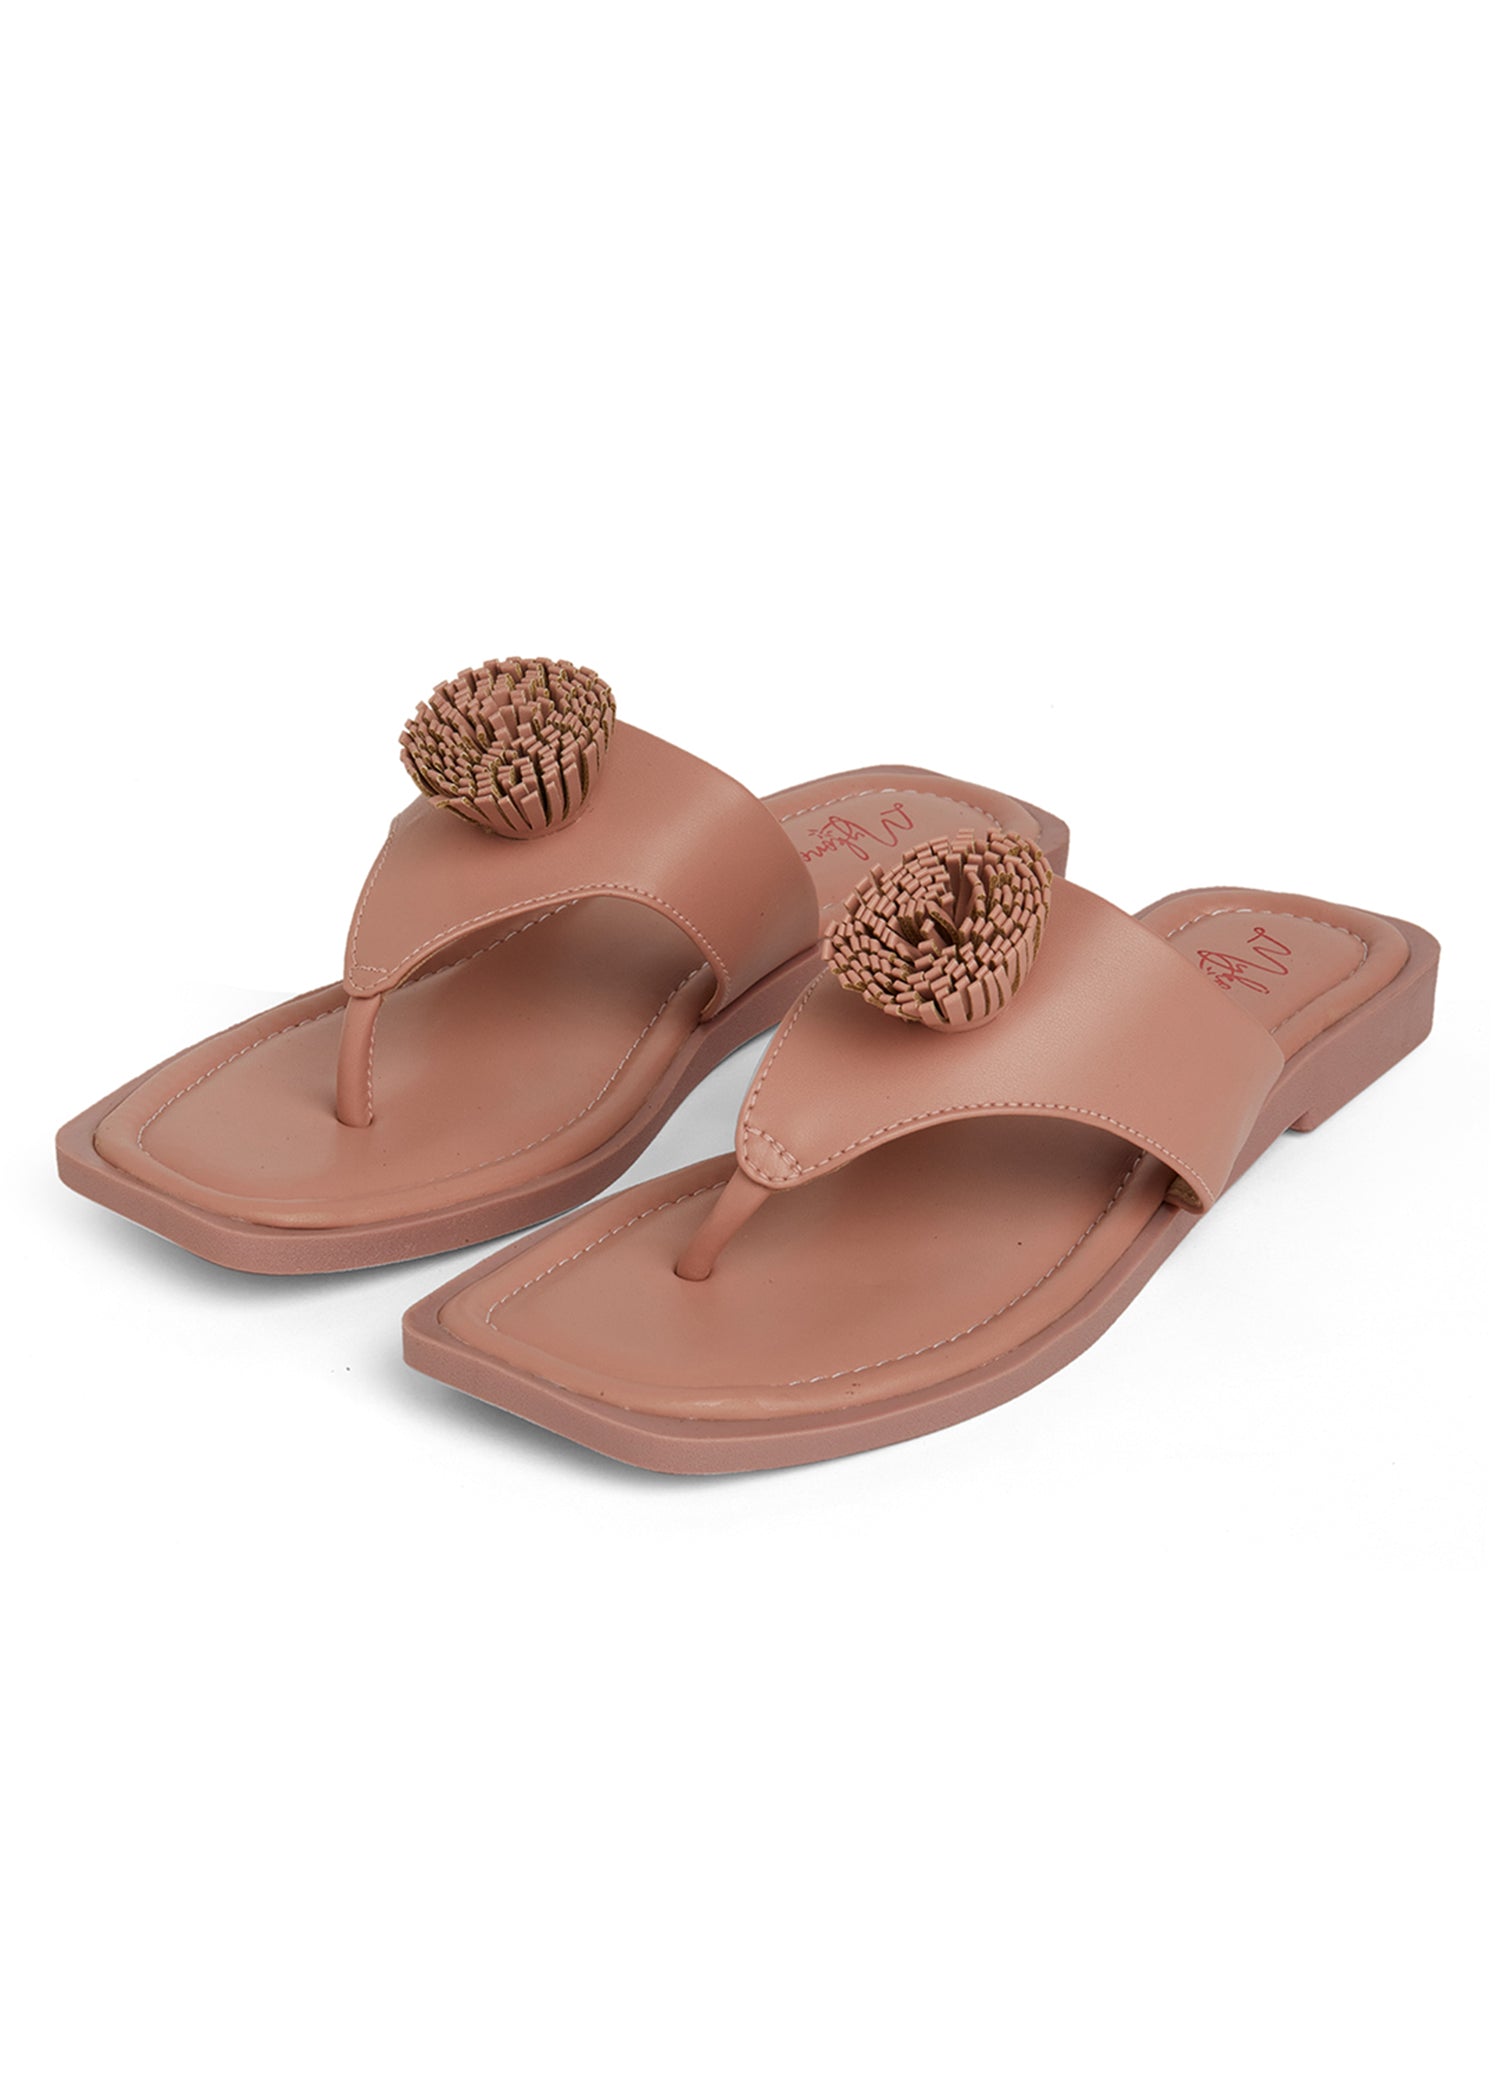 Don't fall flat when it comes to choosing the best stylish flat sandals for  women. Visit Khadim and WOW yourself with style, comfort and trends made  just for you.